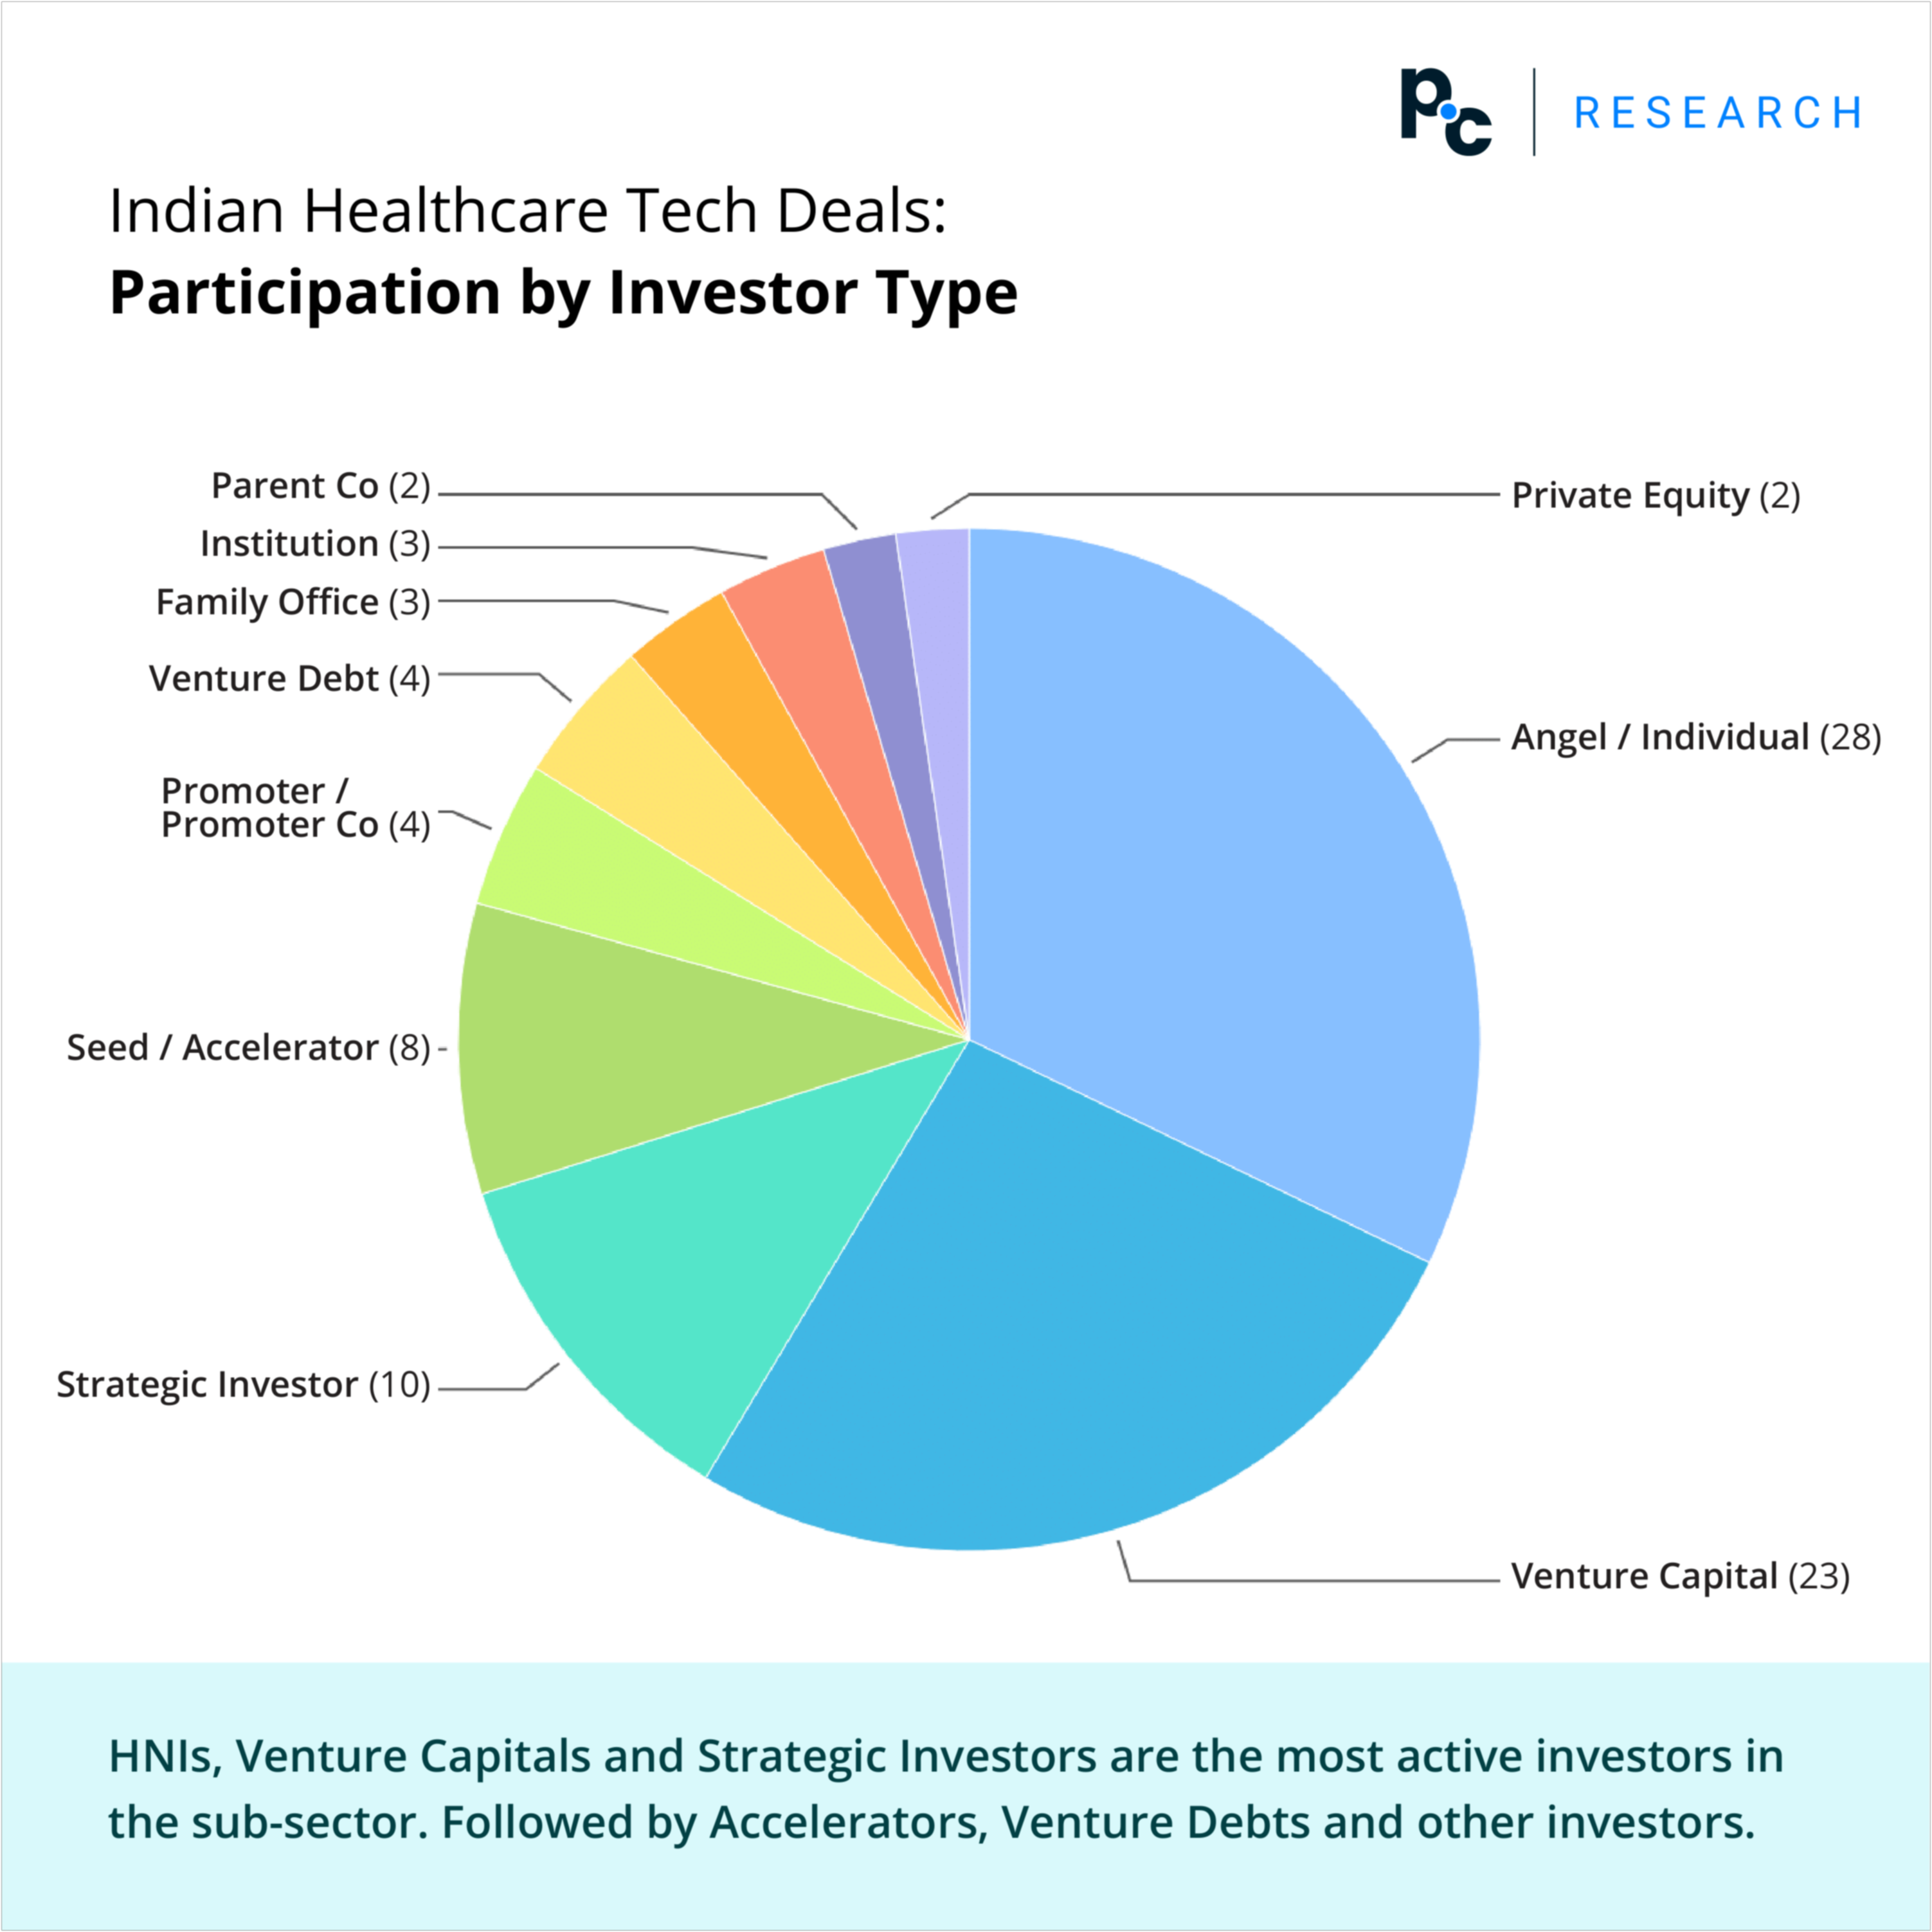 Indian Healthcare Tech Deals: Participation by Investor Type.

HNIs, Venture Capitals and Strategic Investors are the most active investors in the sub-sector. Followed by Accelerators, Venture Debts and other investors. 